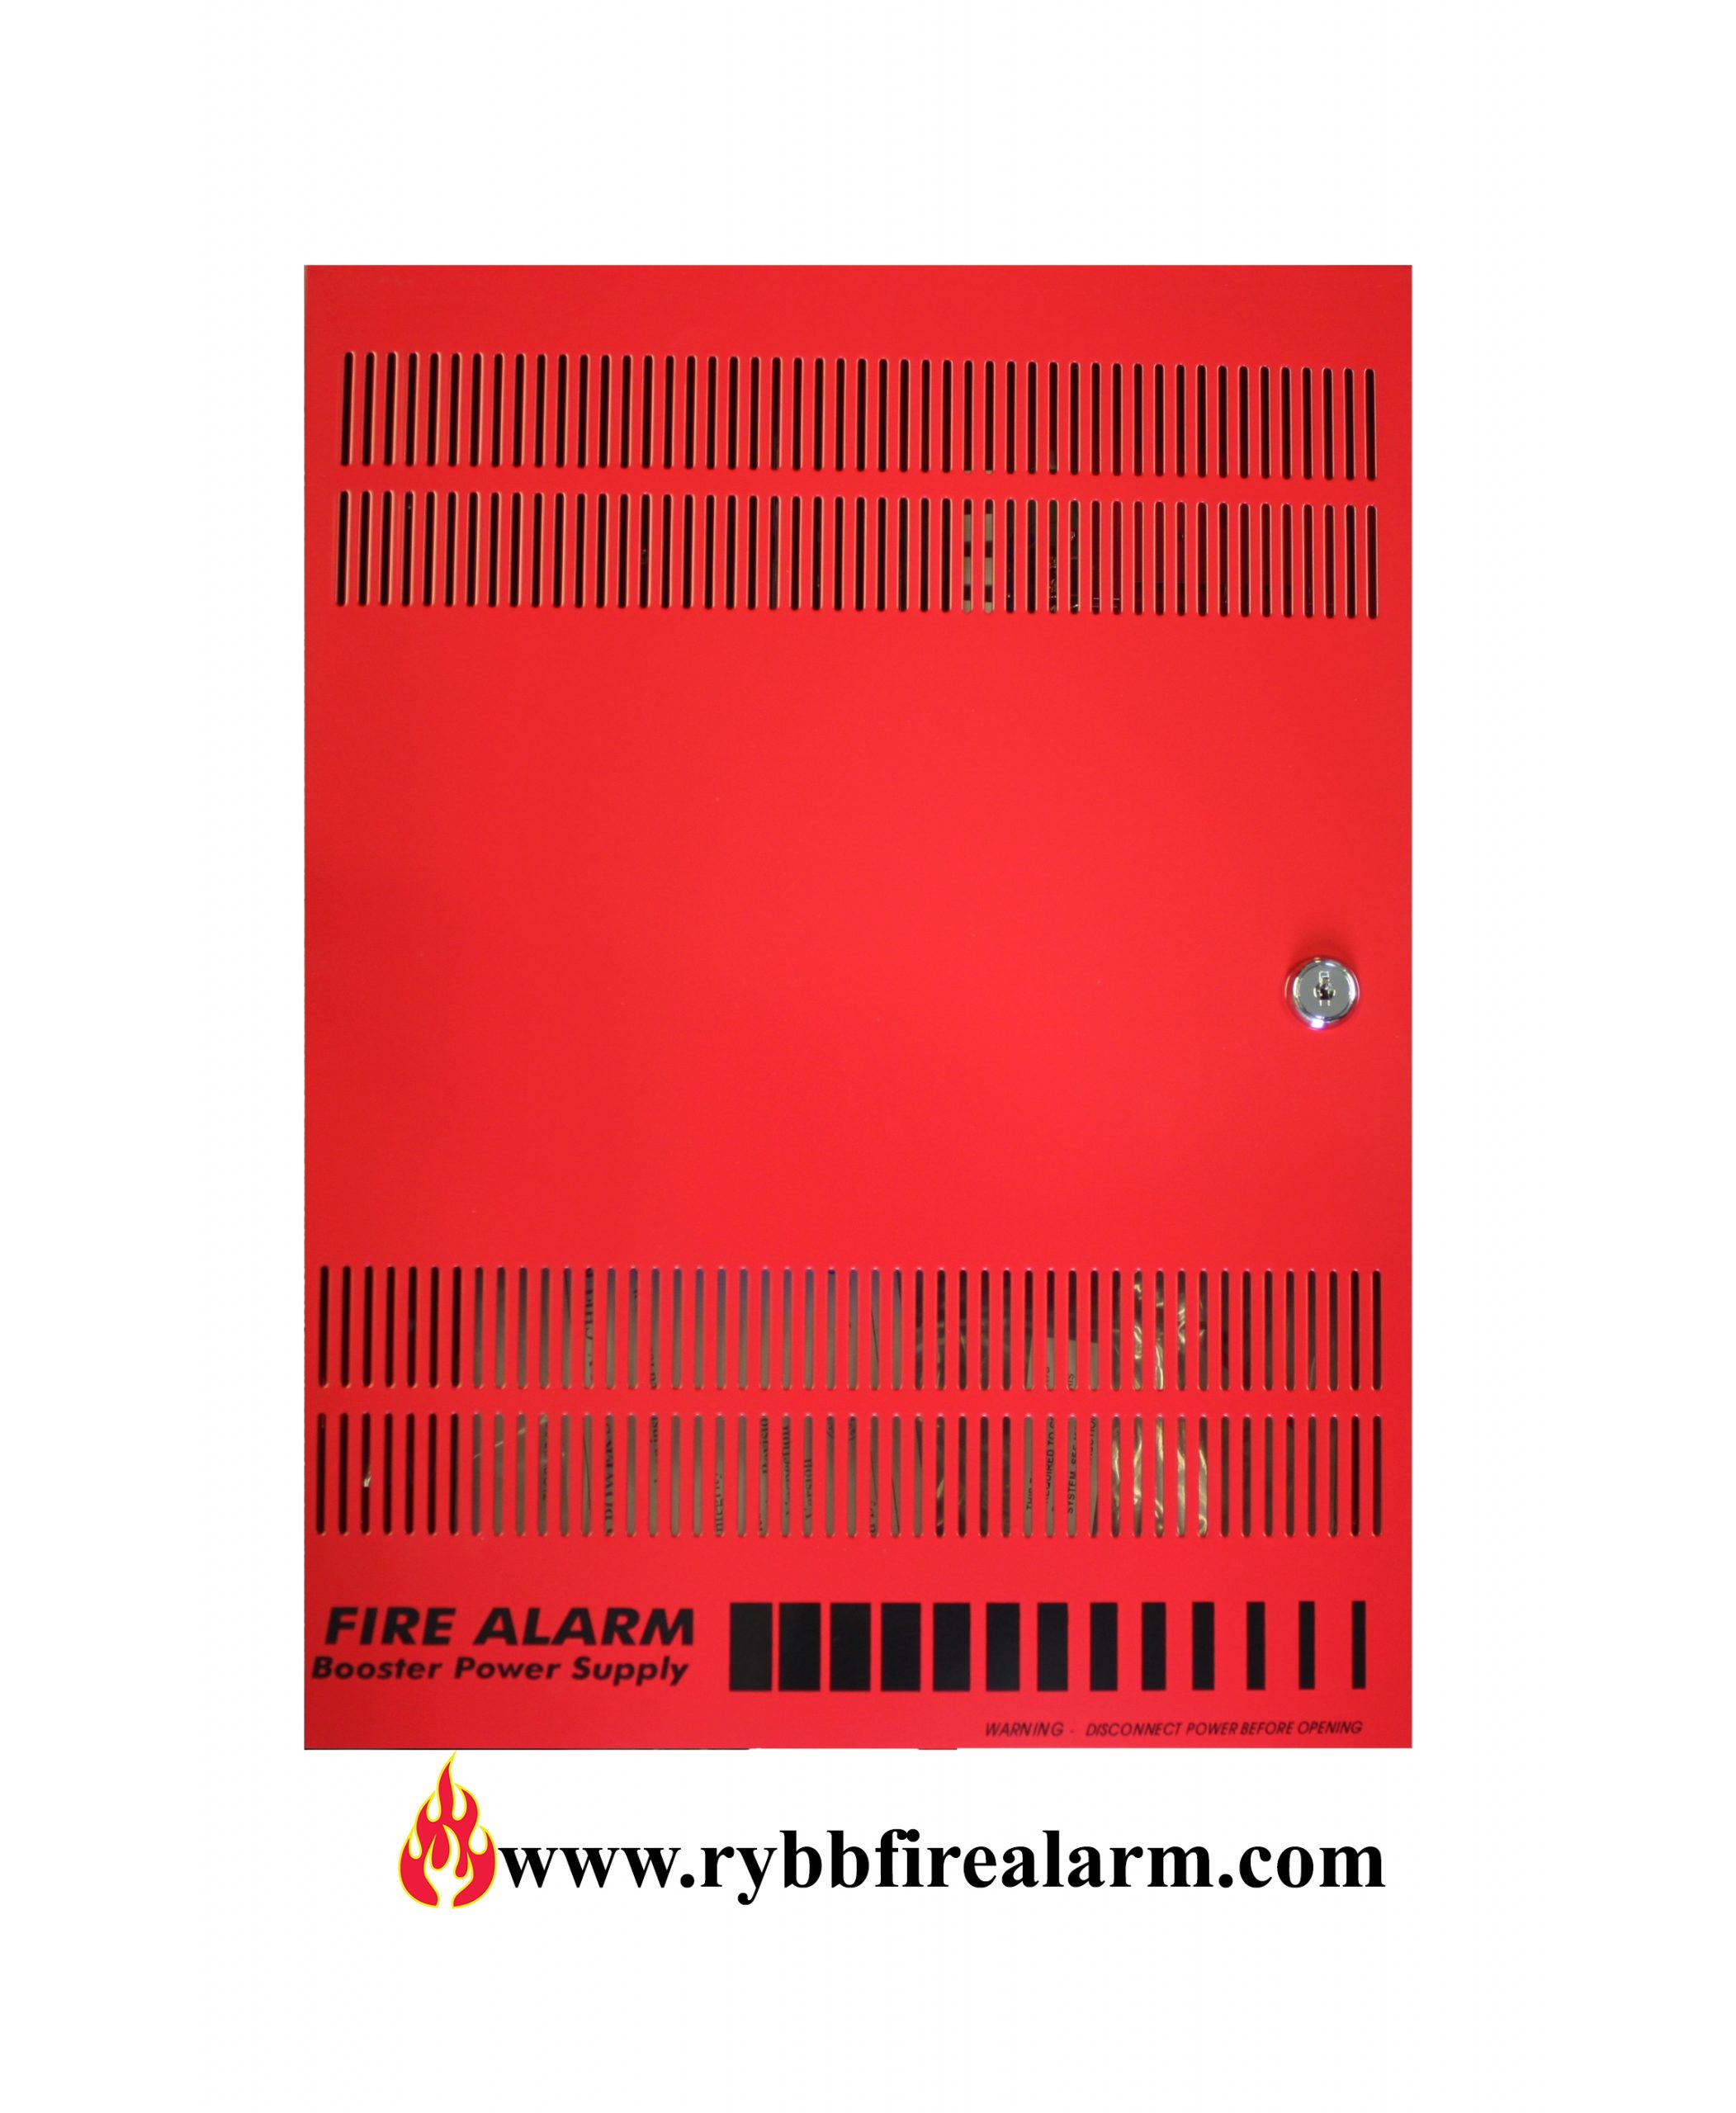 EST APS10A REMOTE AUXILLARY POWER SUPPLY FIRE ALARM 